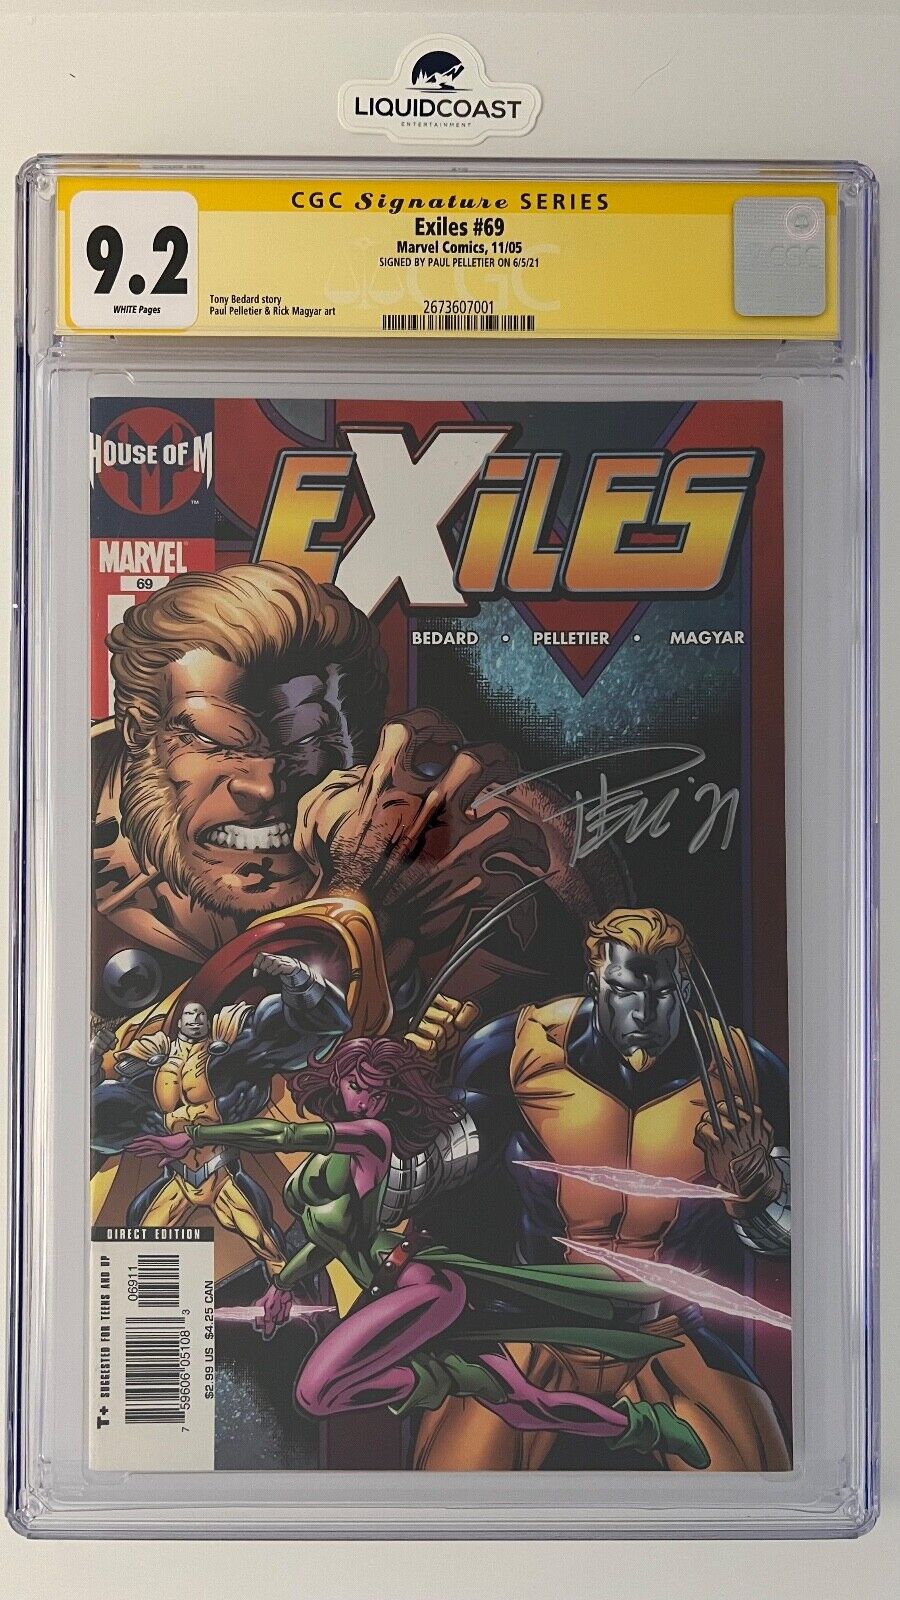 Exiles #69 SS CGC 9.2 signed by Paul Pelletier